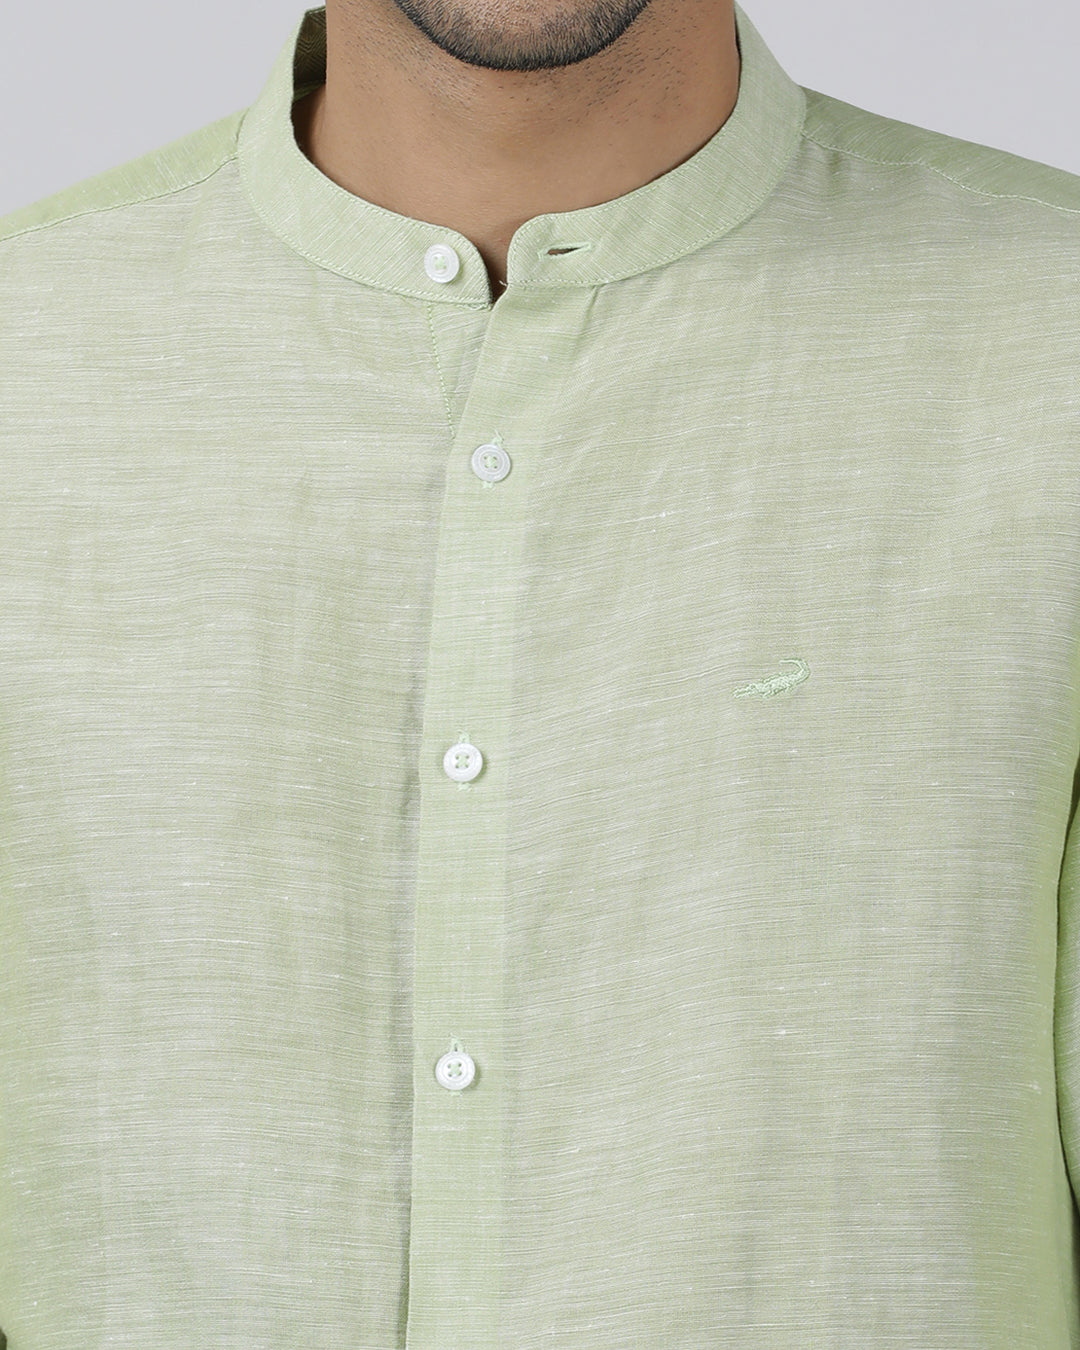 Casual Light Green Full Sleeve Regular Fit Solid Shirt with Collar for Men